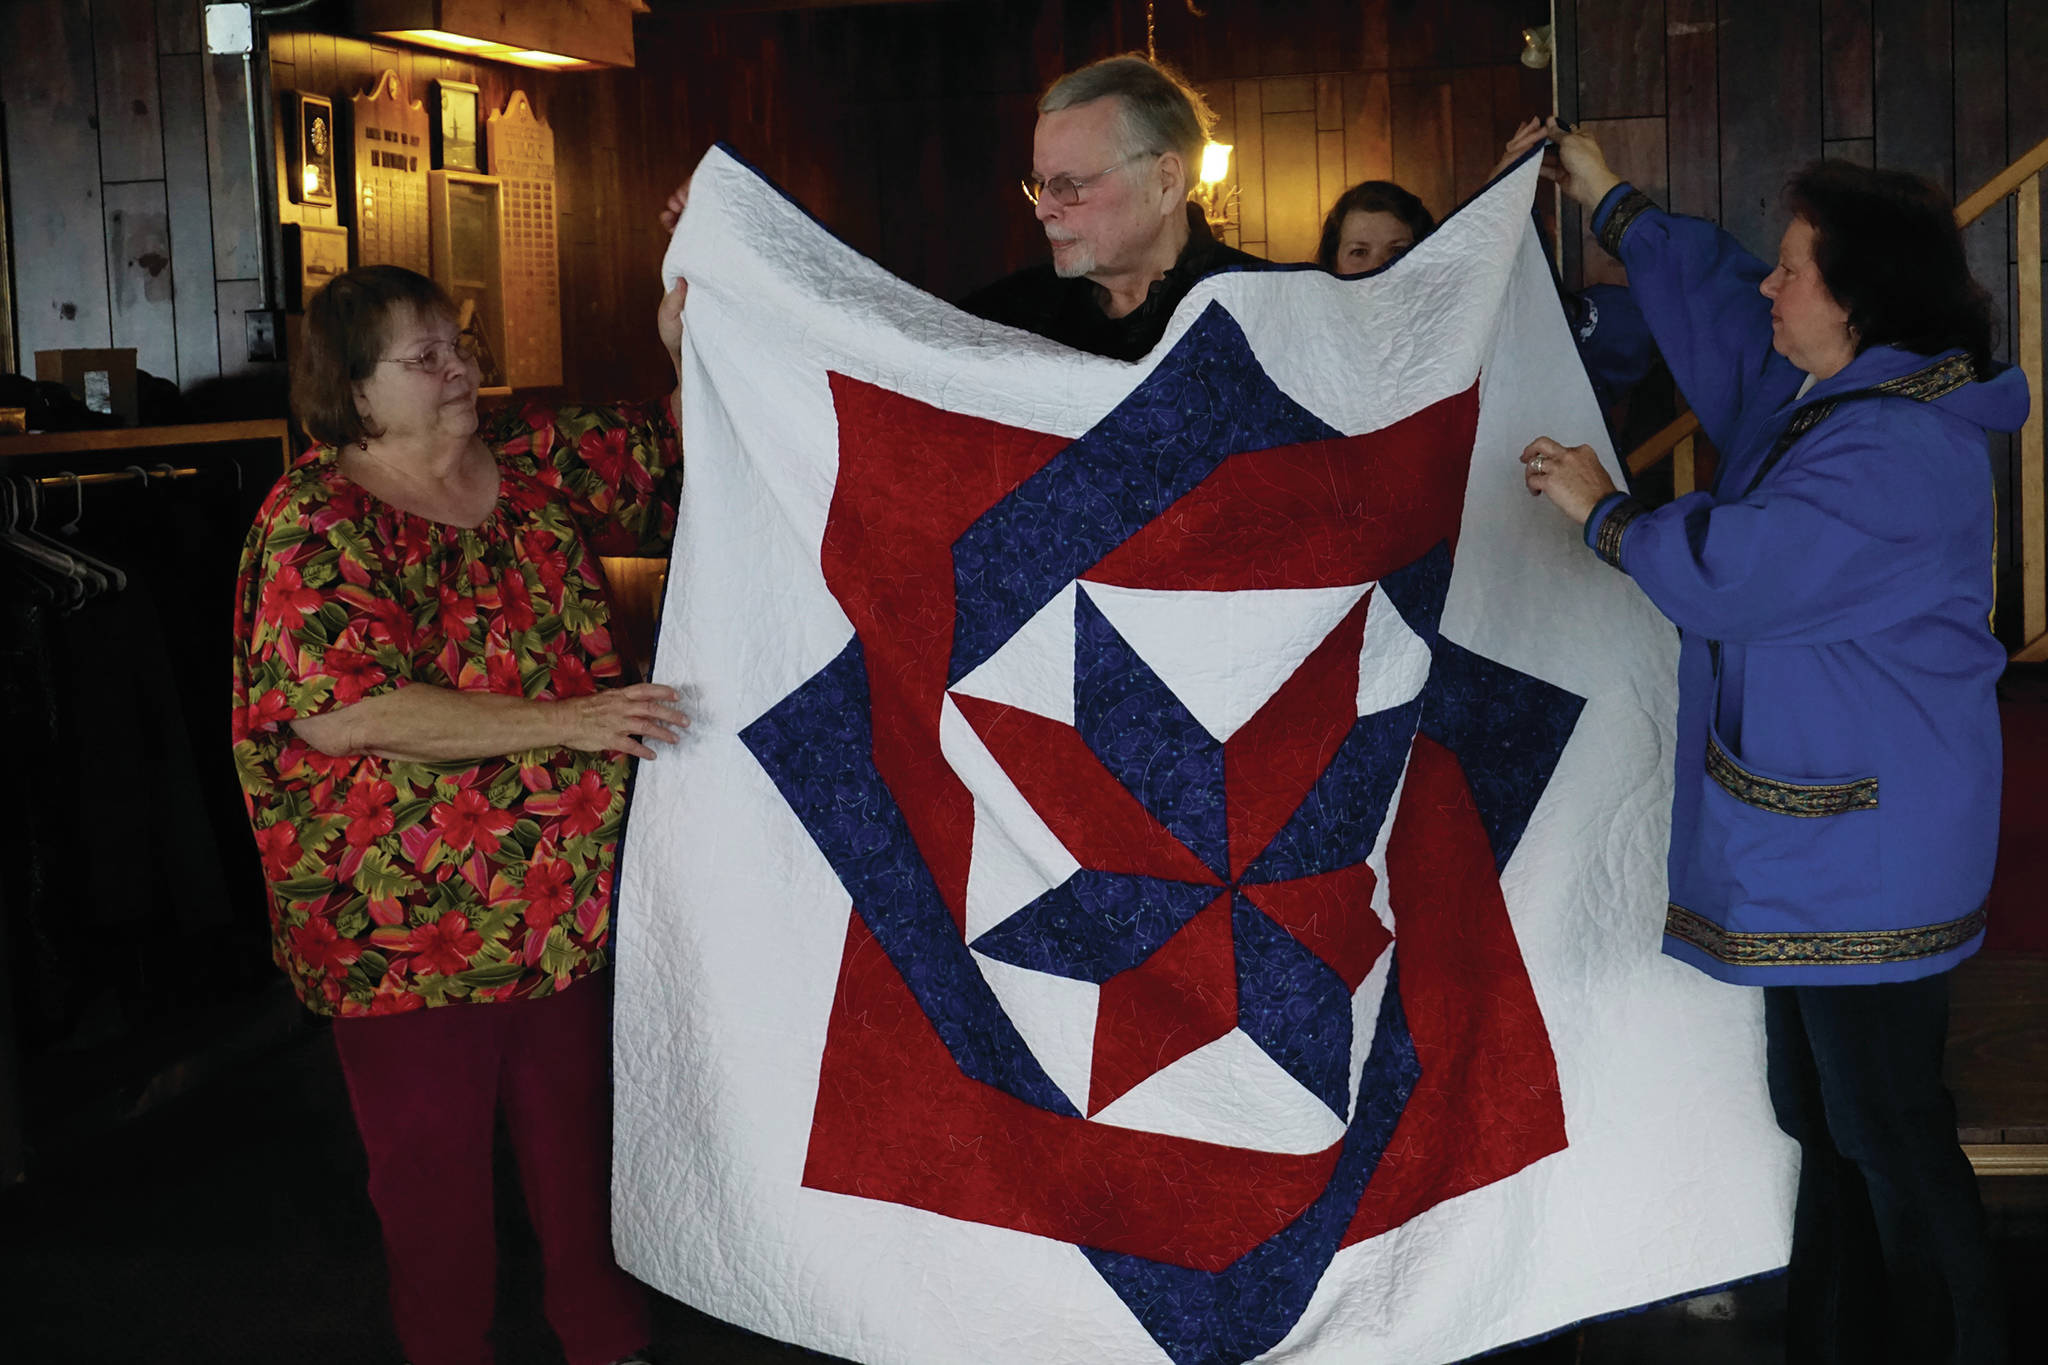 Nick Varney, center, stands behid a Quilt of Valor presented to him at the Veterans Day lunch held at the Elks Lodge on Nov. 11, 2019, in Homer, Alaska. To his right is Linda Wagner, who pieced the quit. Varney served in the U.S. Air Force and the Alaska Air National Guard. (Photo by Michael Armstrong/Homer News)